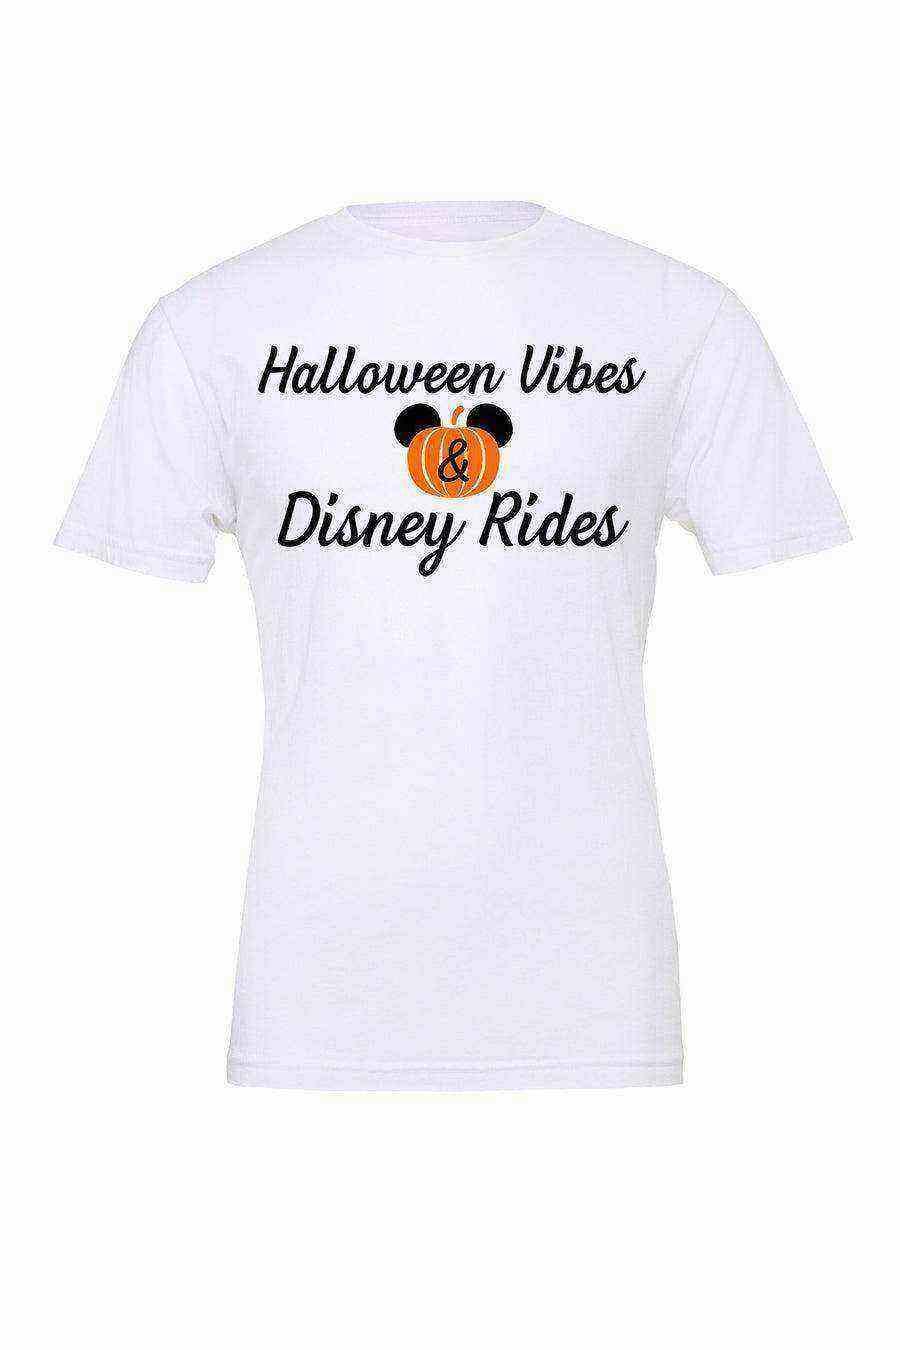 Womens | Halloween Vibes and Rides Shirt - Dylan's Tees